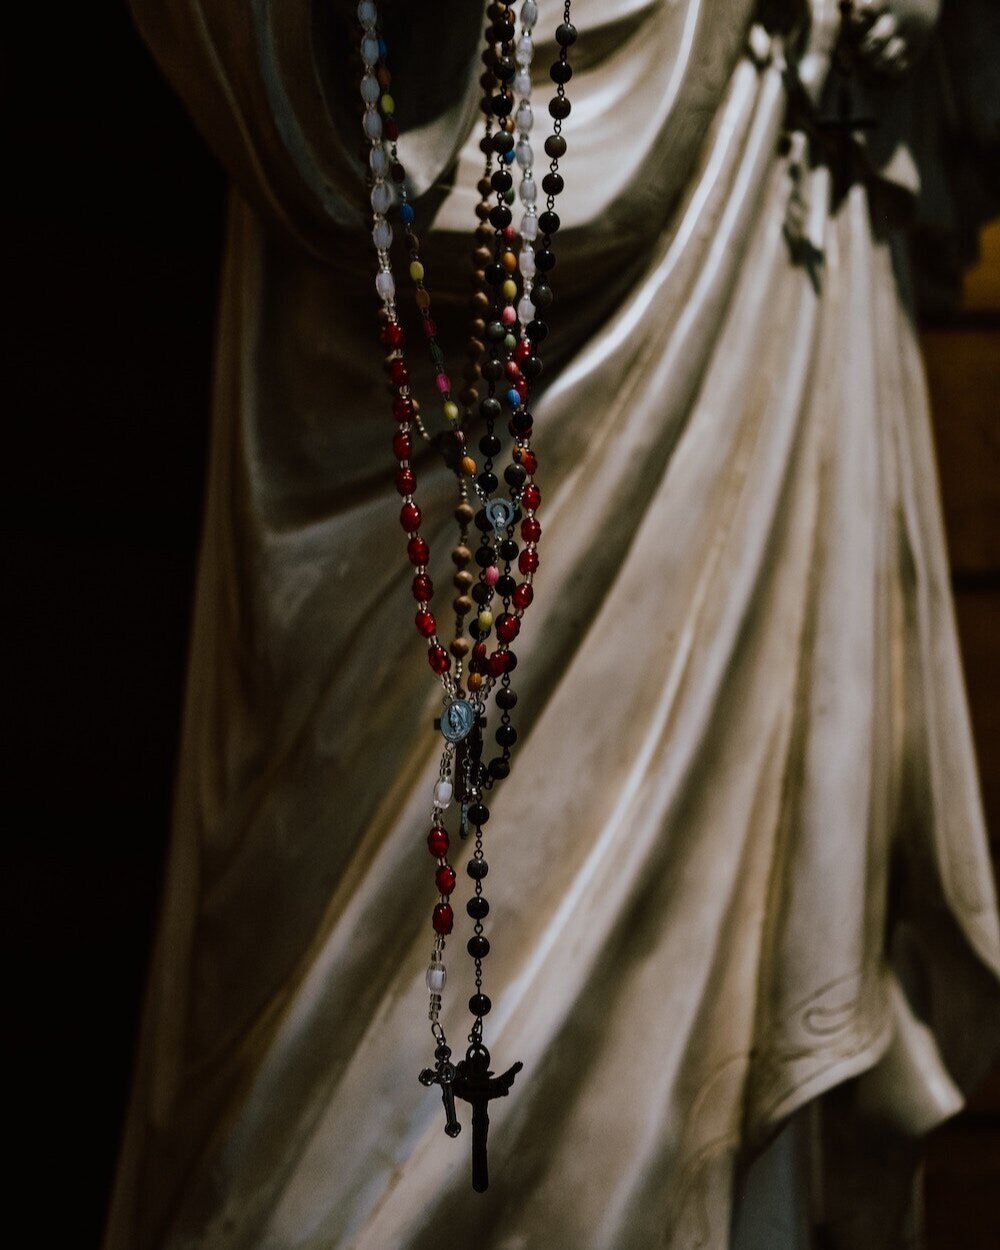 Rosaries Hanging on Statue